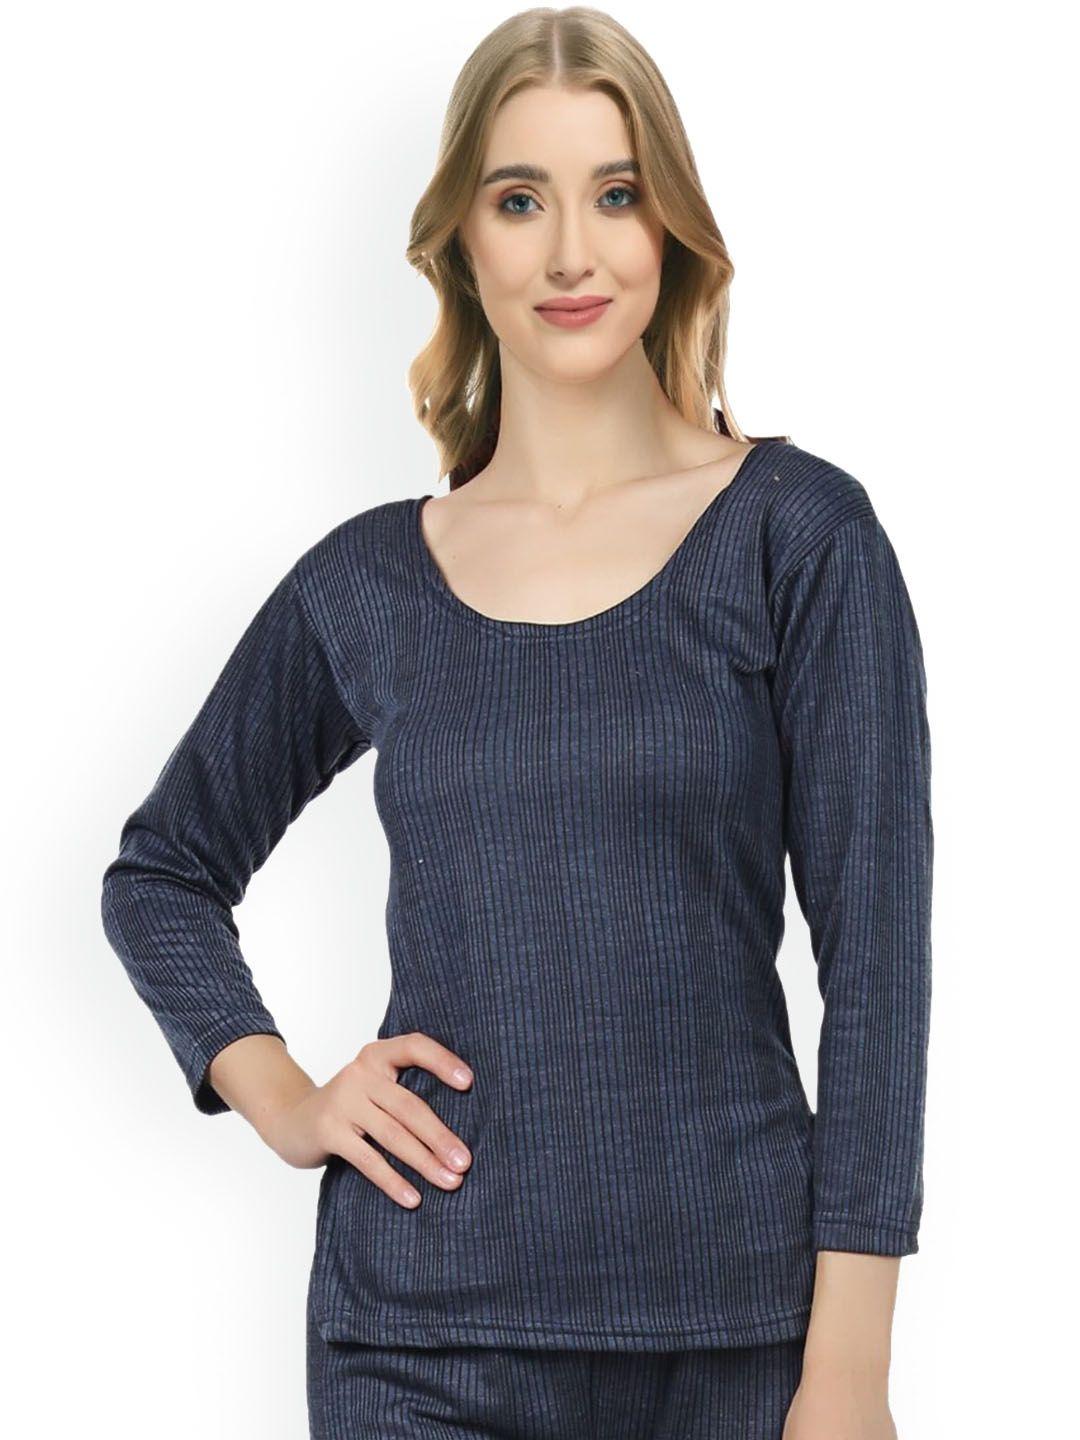 funahme ribbed round neck thermal top